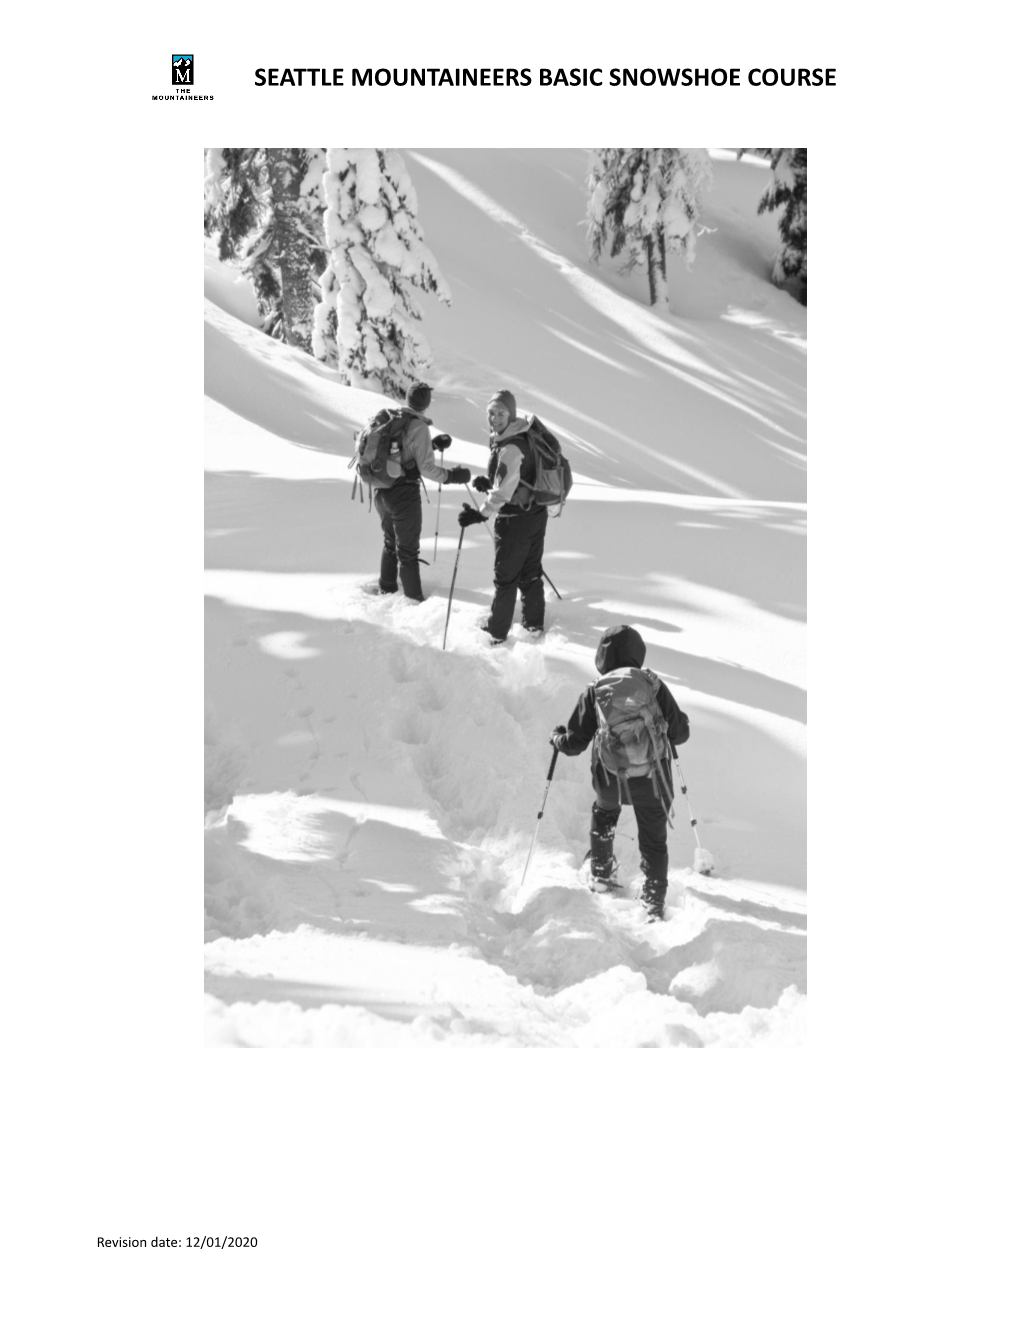 Seattle Mountaineers Basic Snowshoe Course